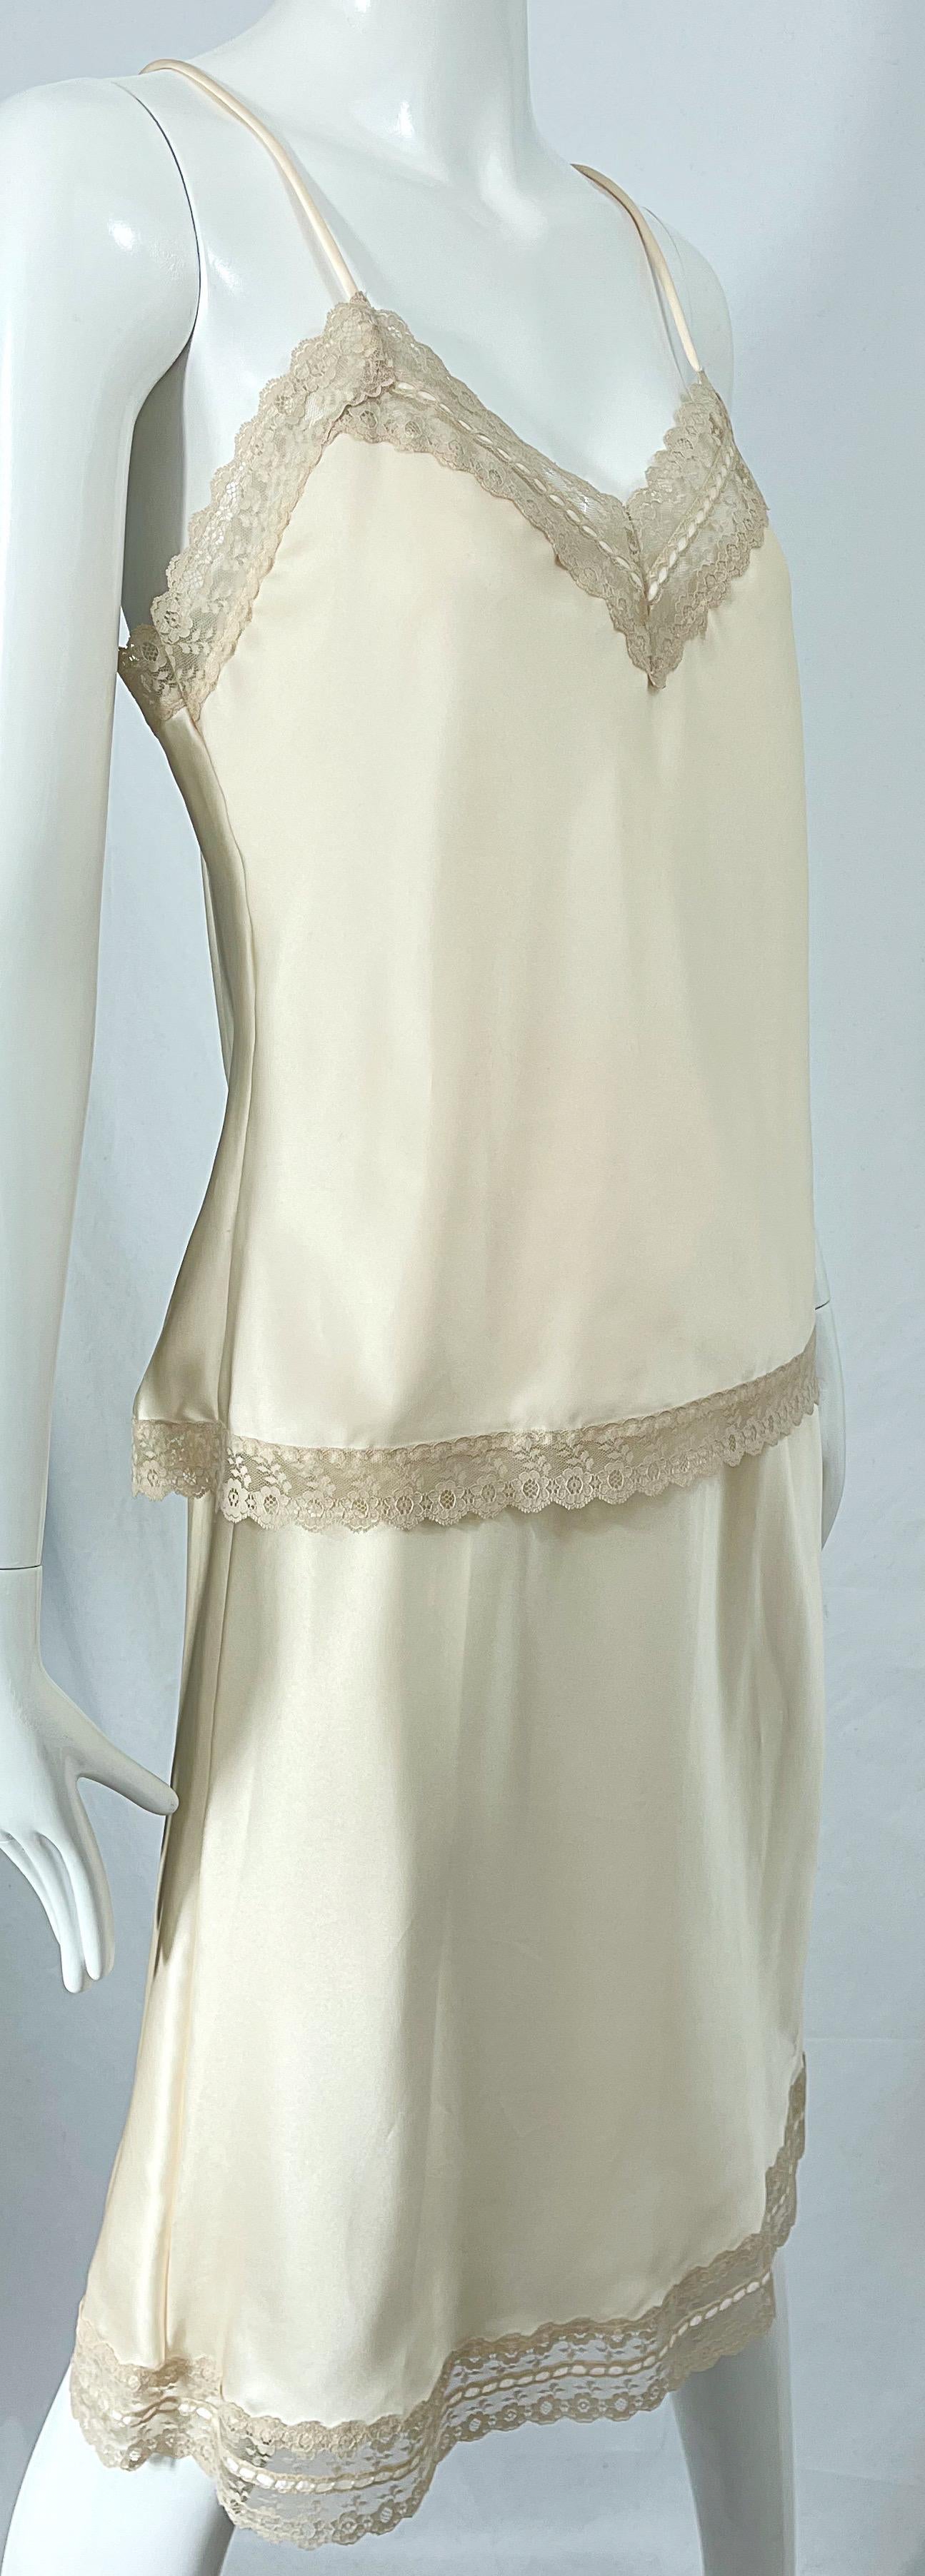 NWT 1980s Christian Dior Ivory Satin Lace Three Piece Cami 80s Lingerie PJ Set  For Sale 9